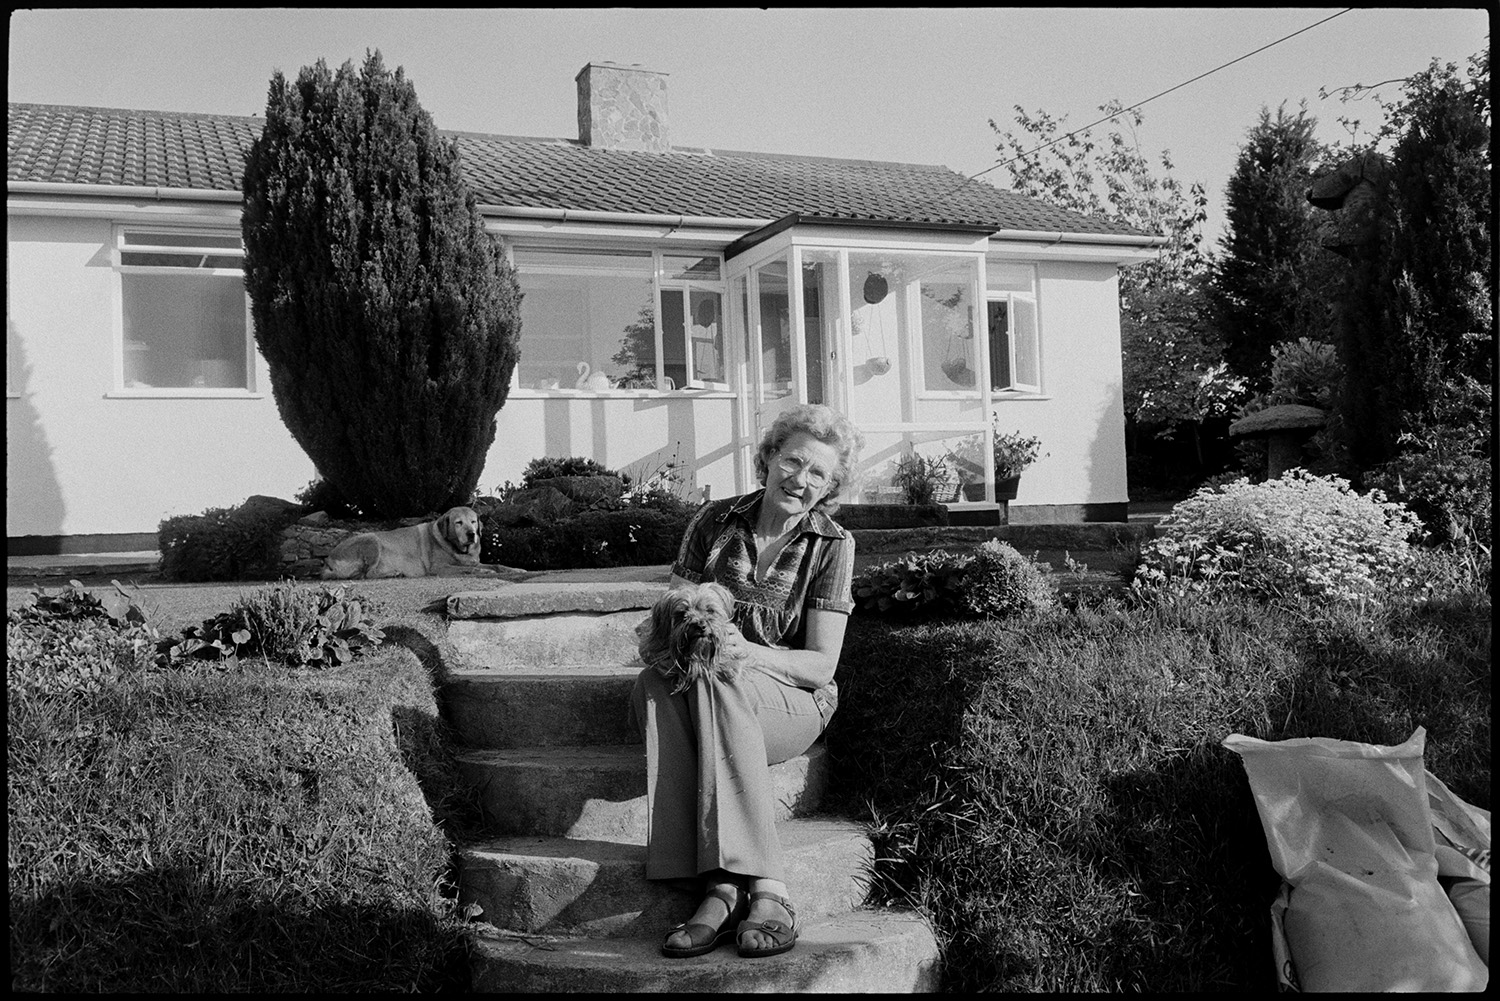 Woman sitting in garden of bungalow.
[Beatrice Nancekivel, also known as Beat, sitting on steps in her garden leading up to her bungalow, at The Patch, Woodtown, Dolton. She is holding a dog on her lap. Another dog is sitting in the shade of a shrub in the background.]